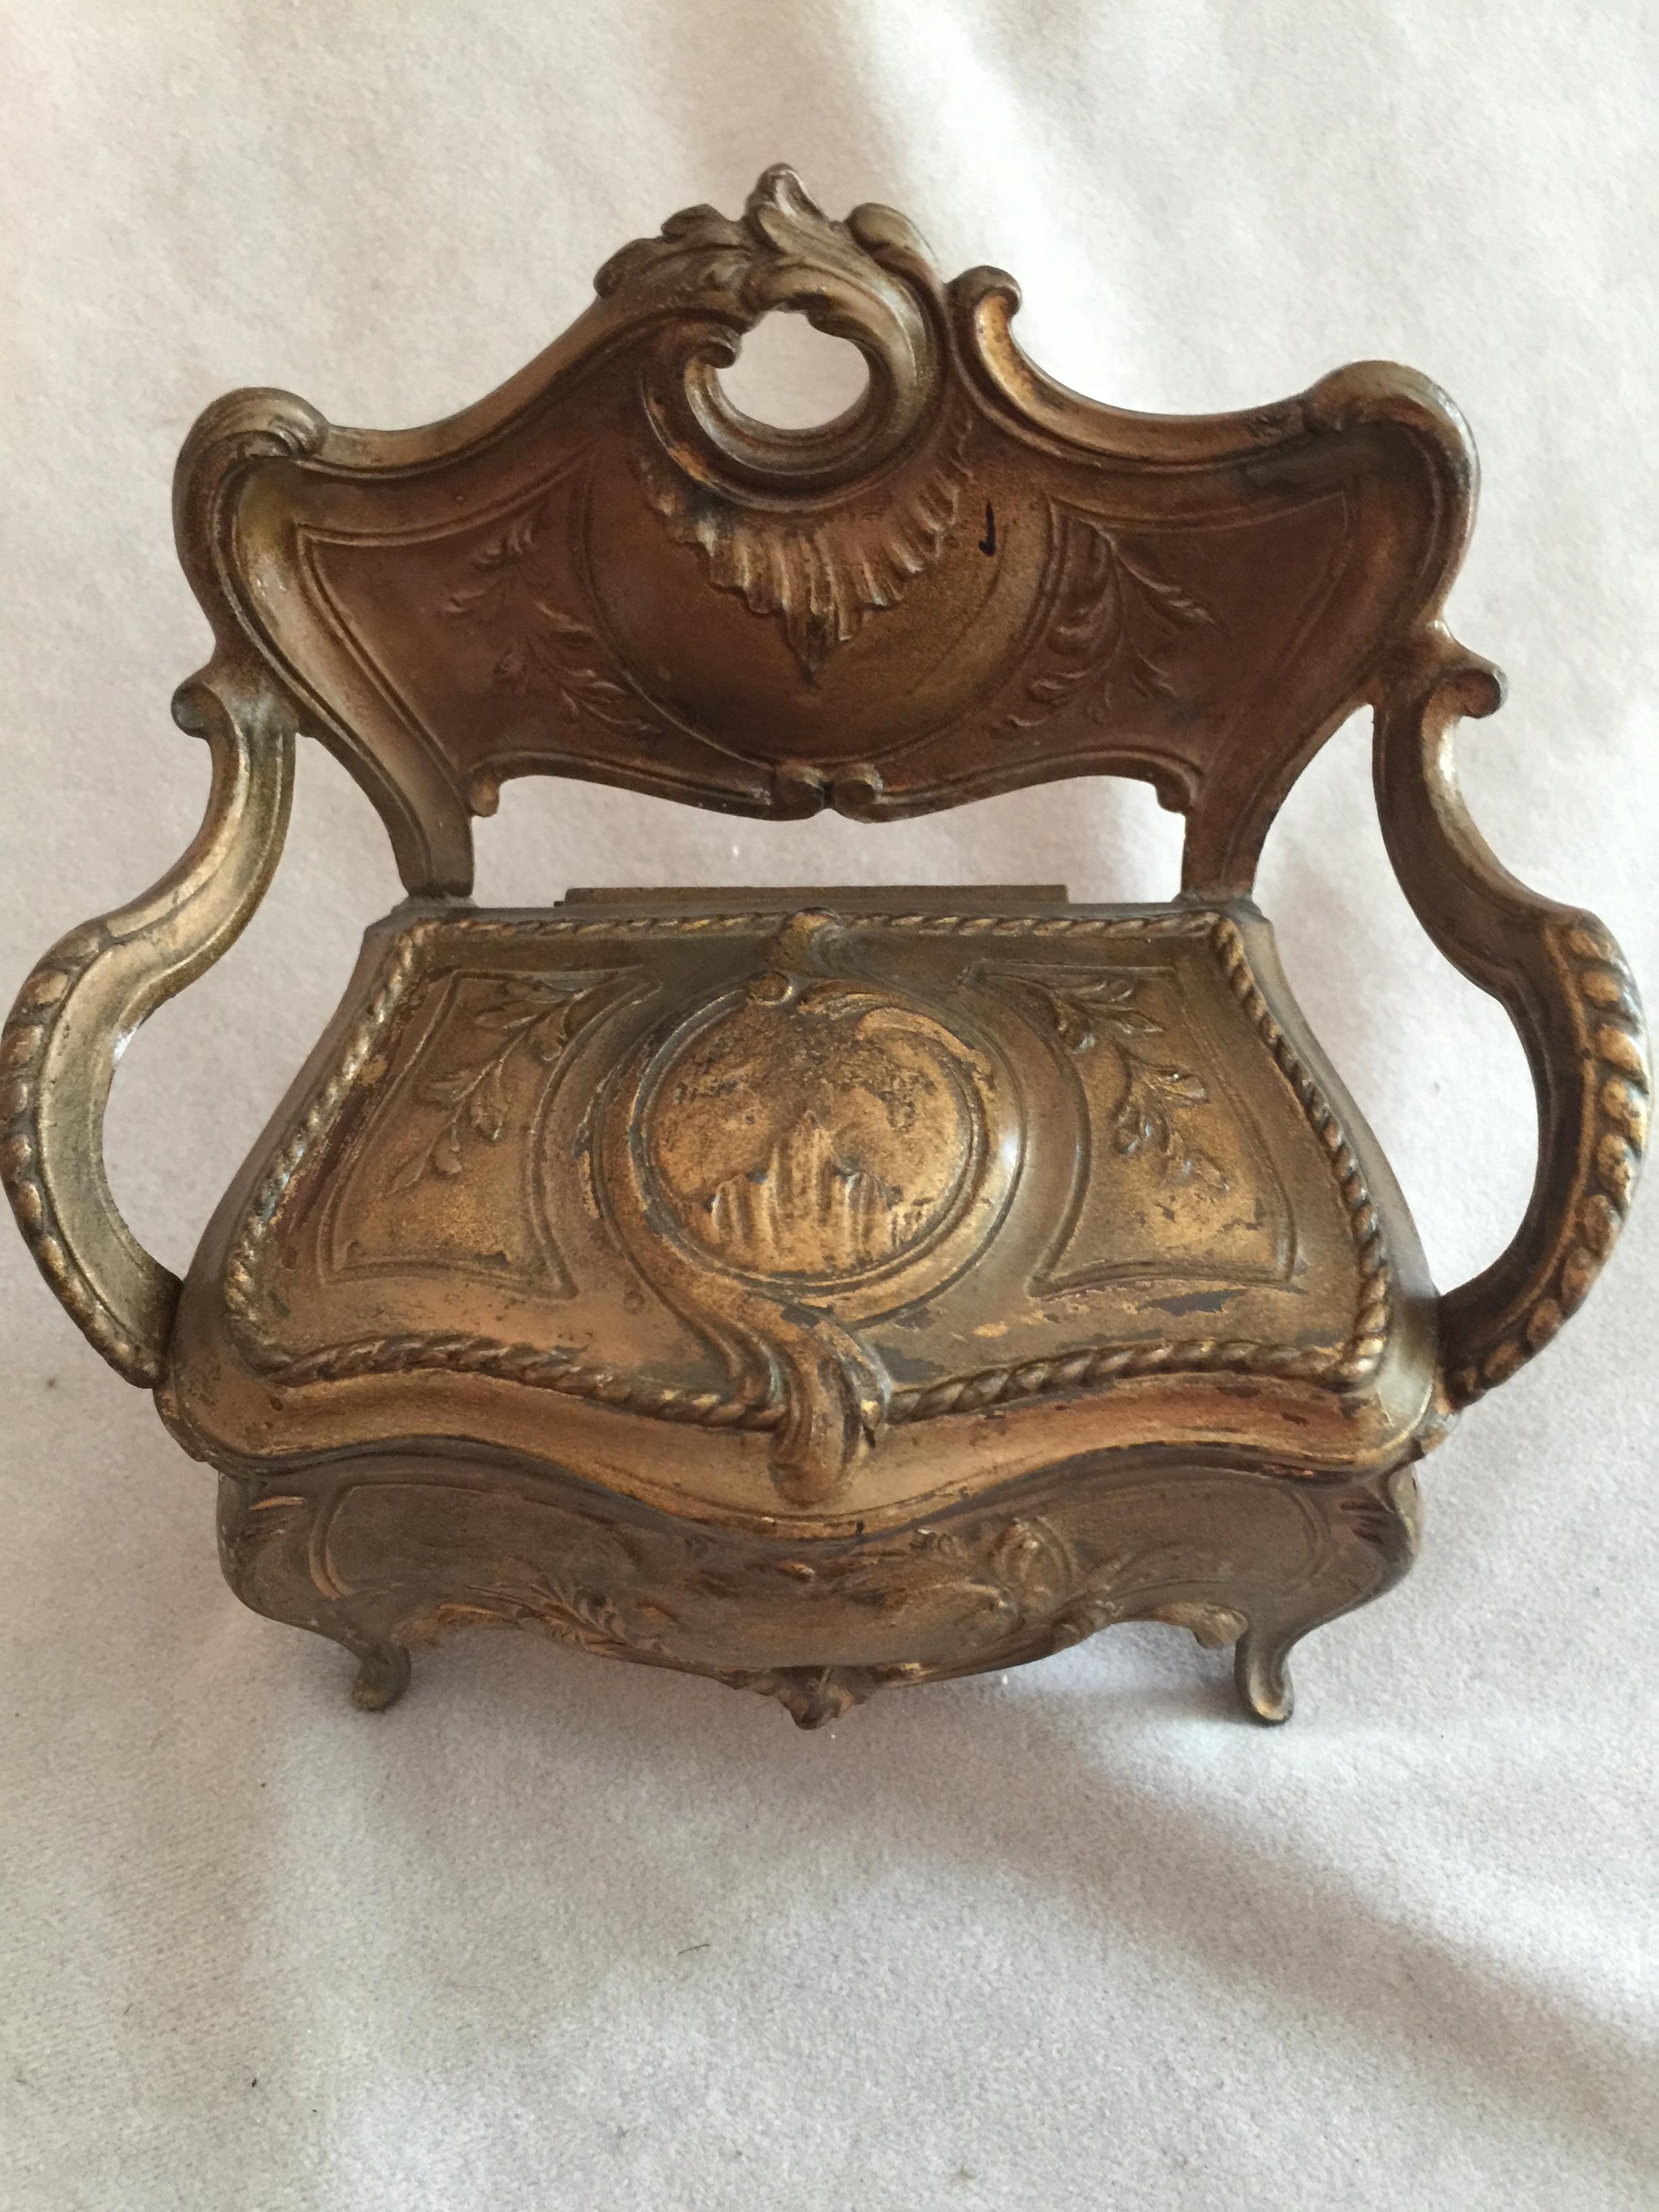 We bought a collection of miniature jewelry boxes, and this may very well be the most unusual and beautiful. It looks like a French loveseat, but the seat lifts up to reveal a jewelry box. The casting and the detailing are very fine. The inside has